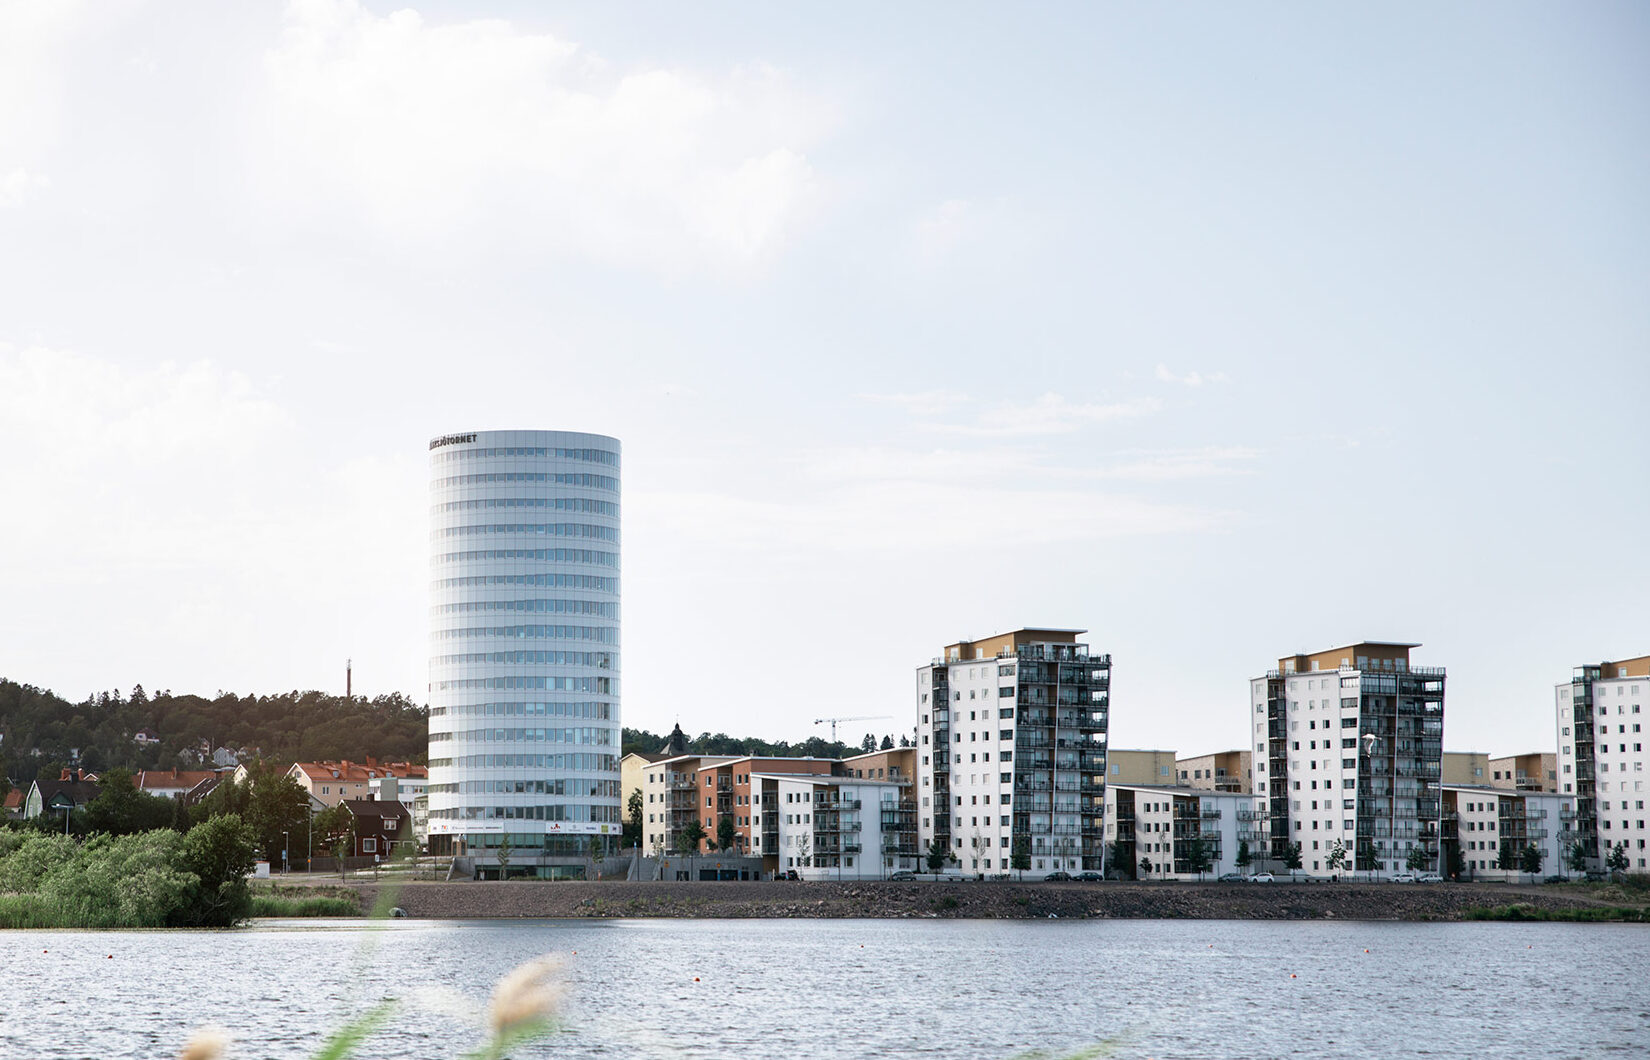 2018 – Relocating the Head Office to Jönköping